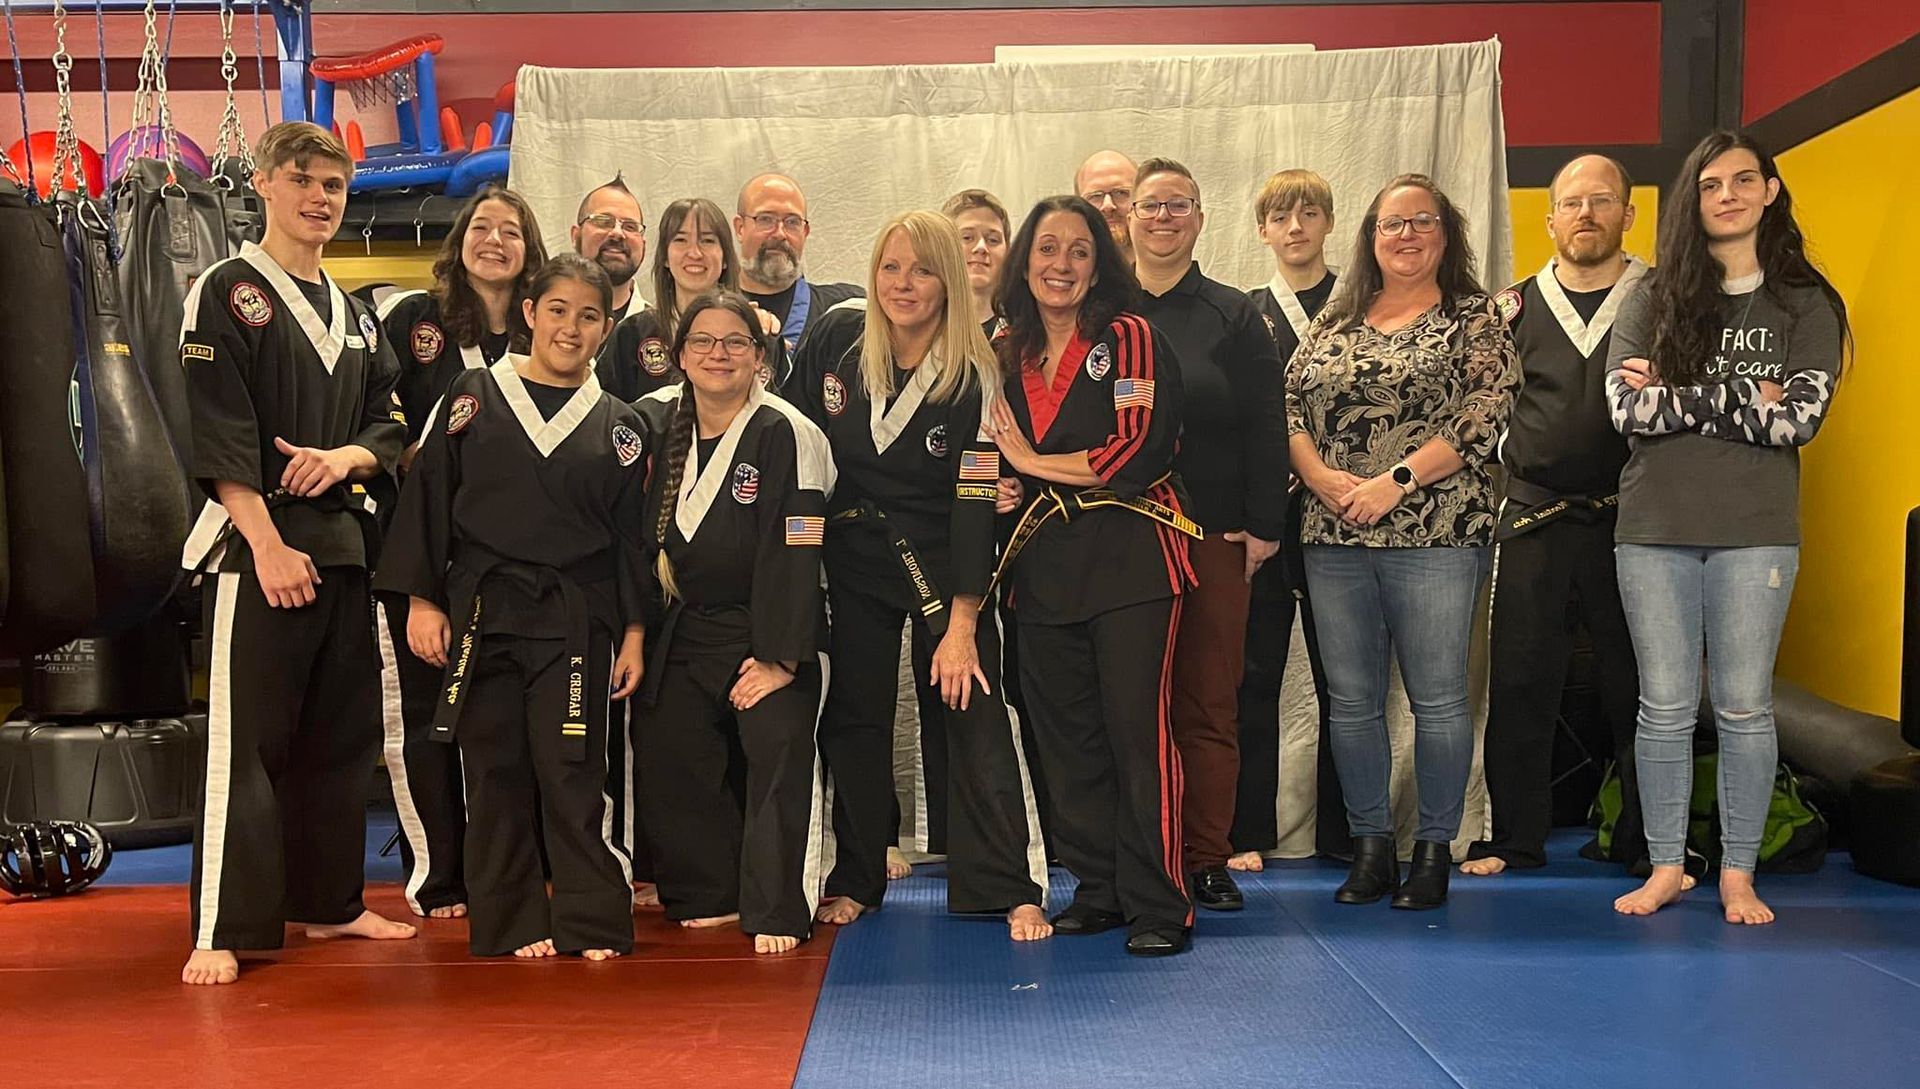 a group of people in martial arts uniforms are posing for a picture in a gym .